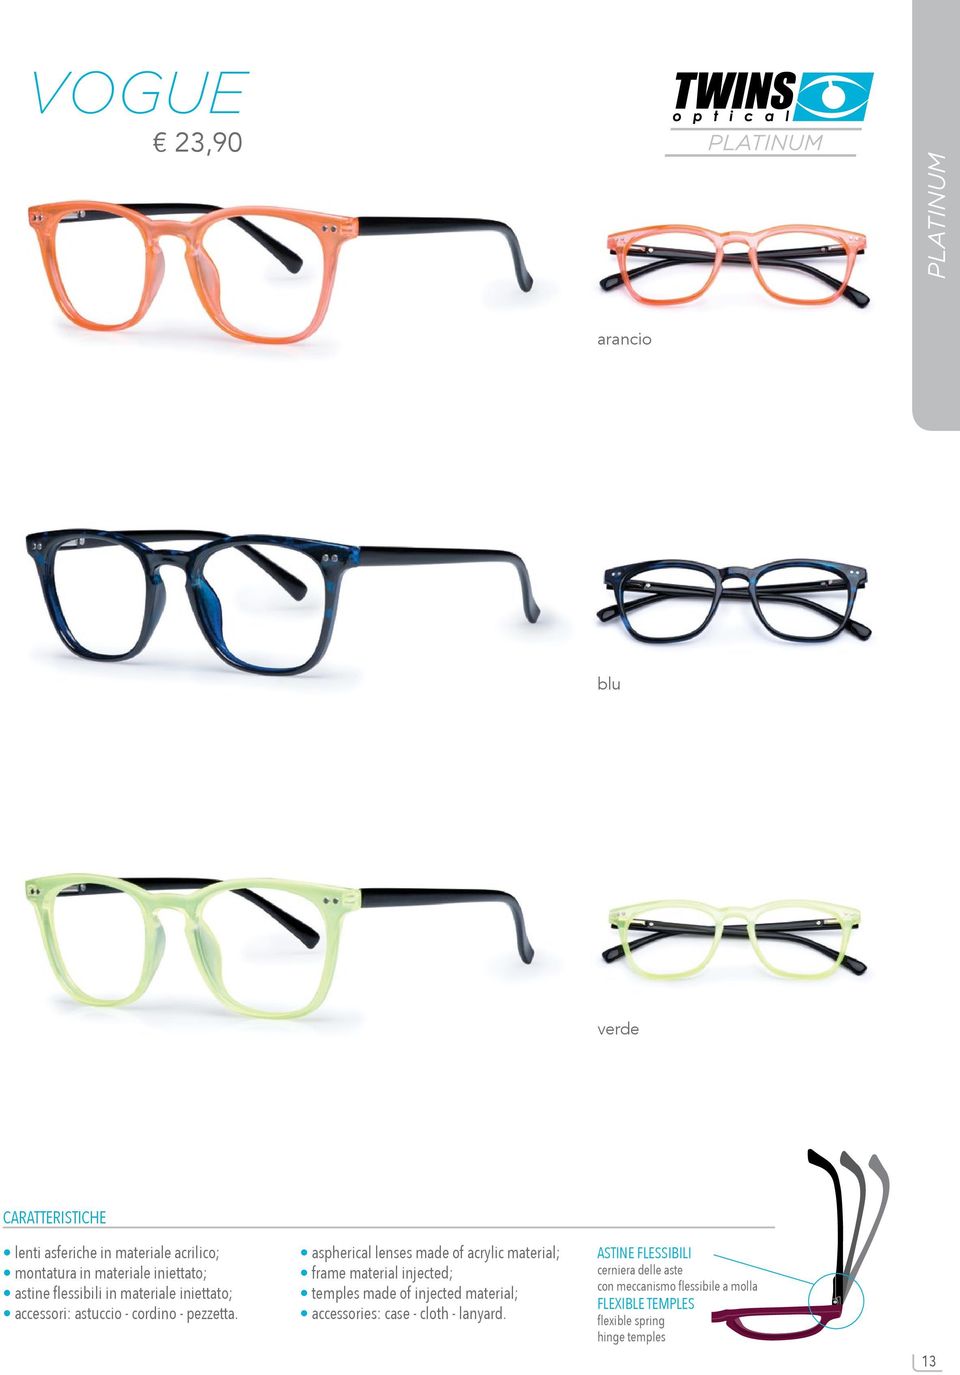 aspherical lenses made of acrylic material; frame material injected; temples made of injected material;